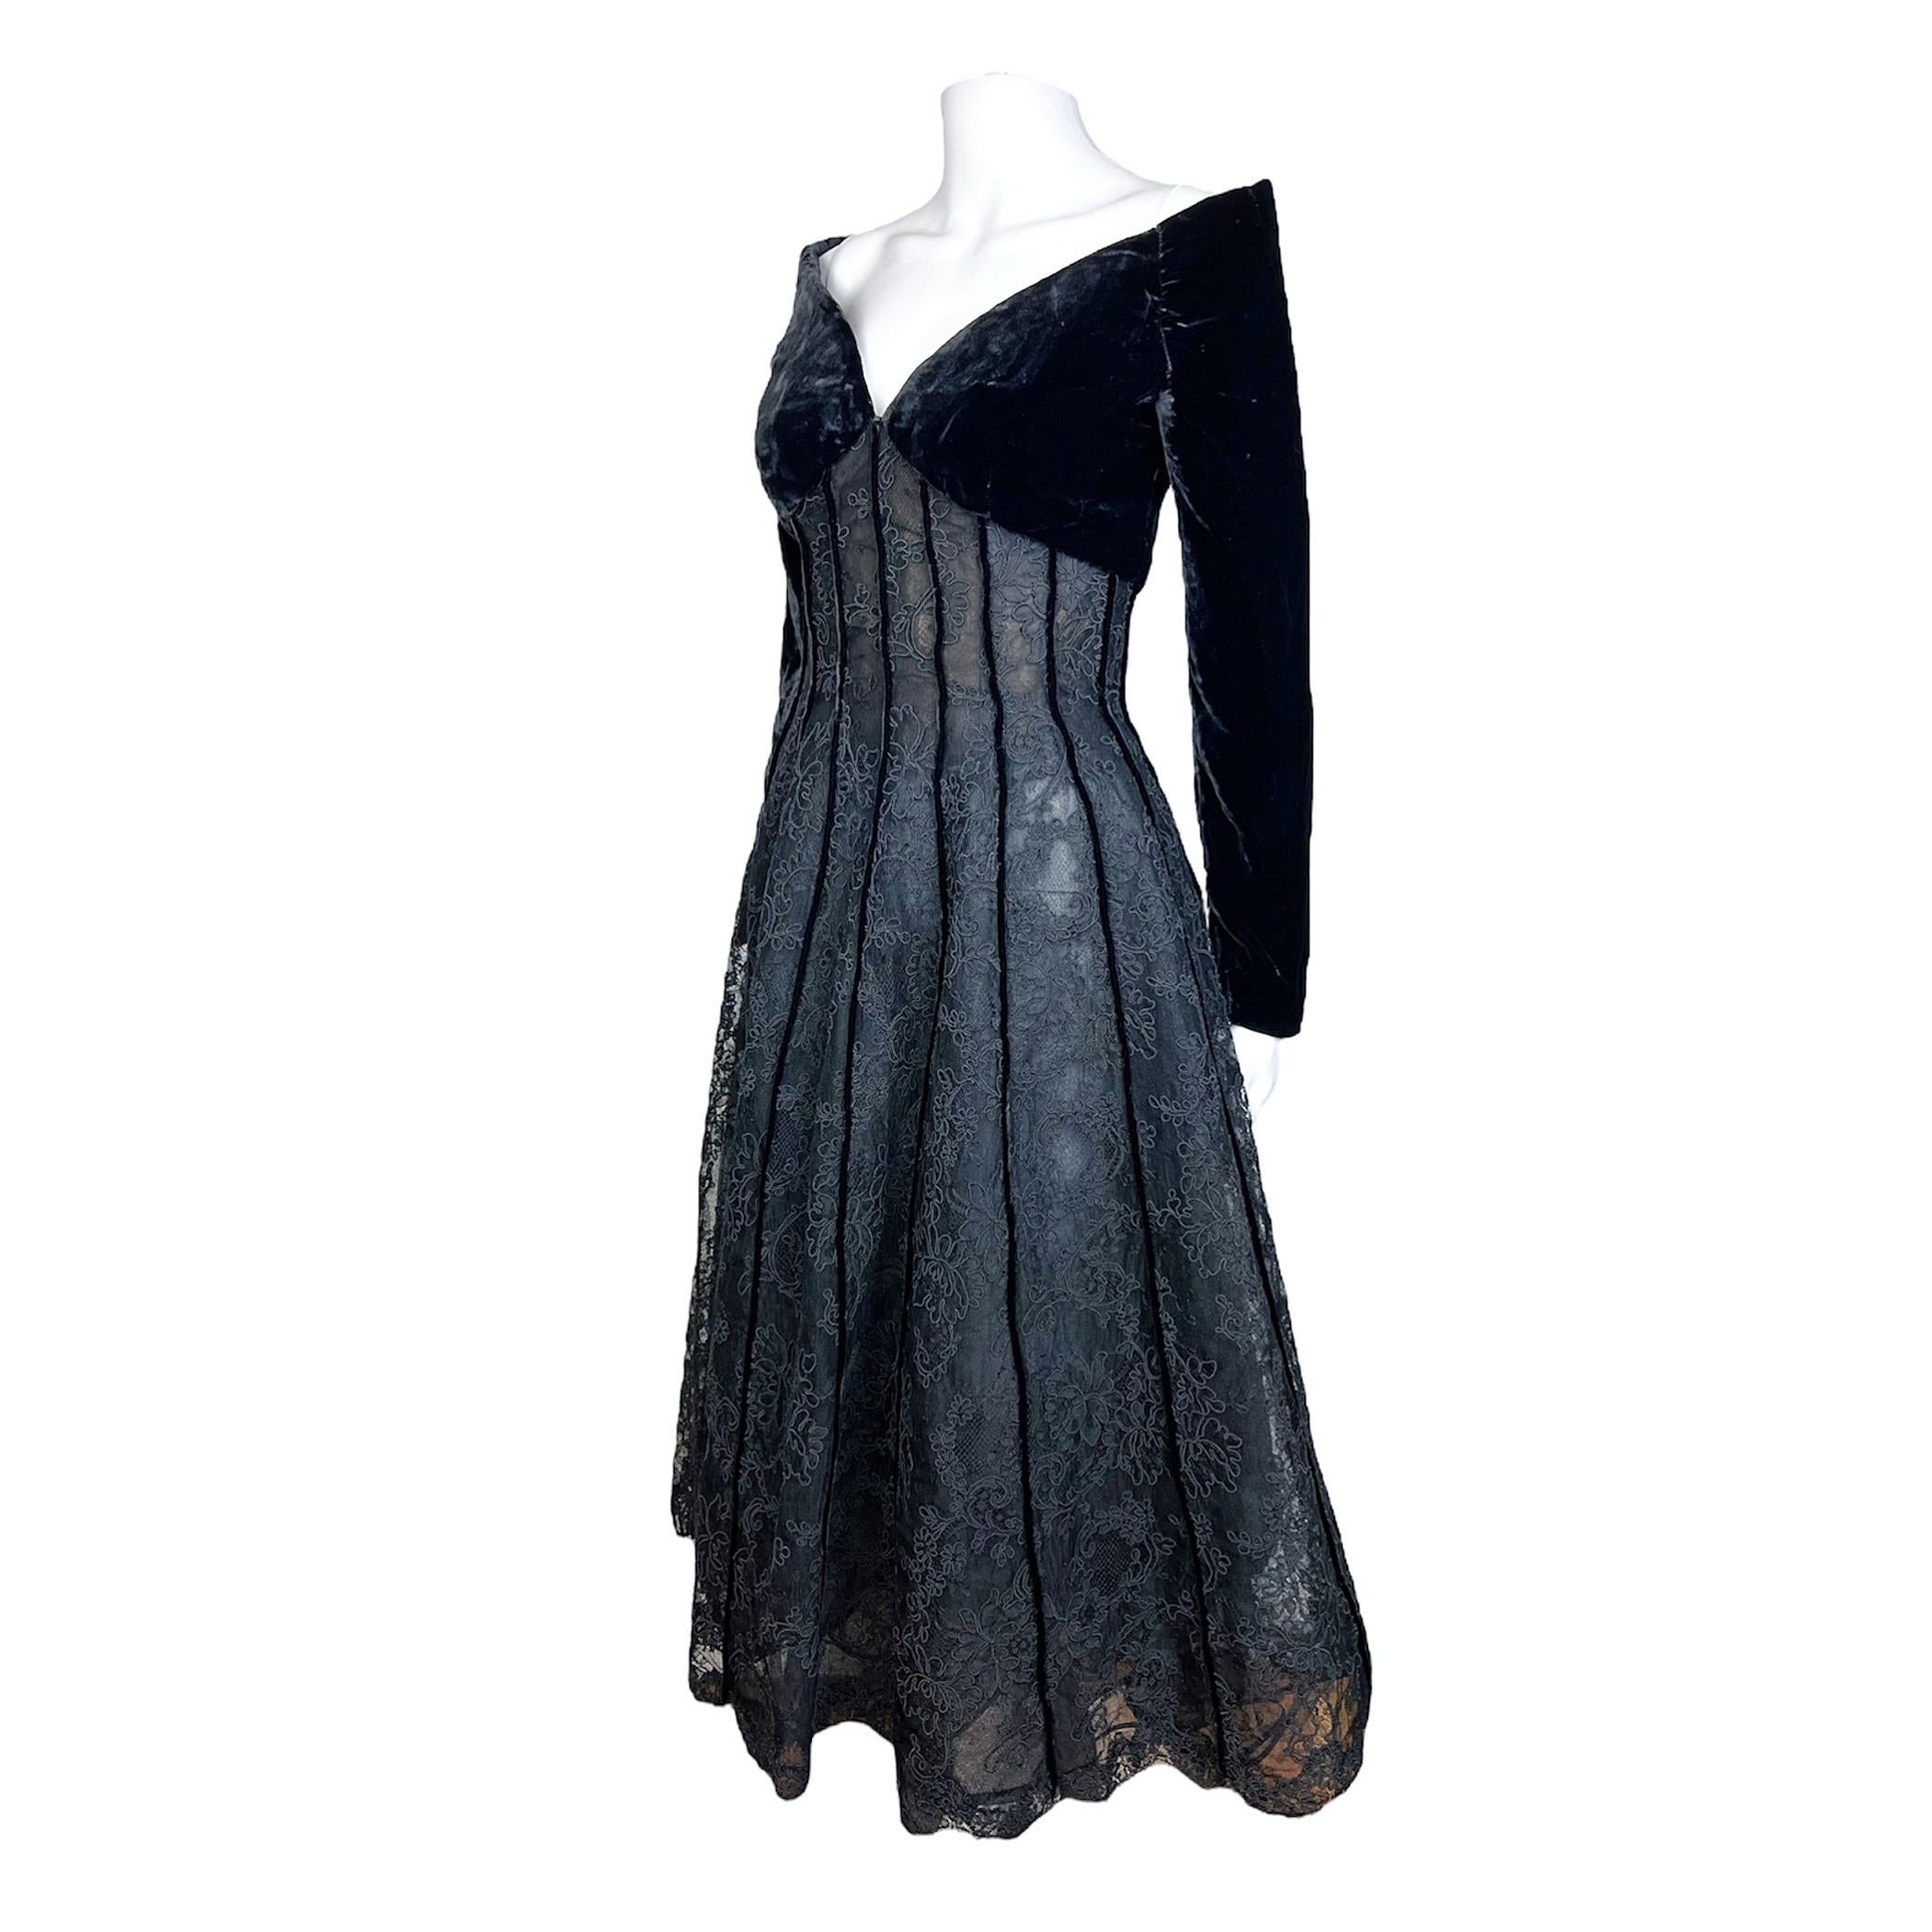 Pierre Balmain Fall 1993 Haute Couture Dress  In Good Condition For Sale In Brooklyn, NY